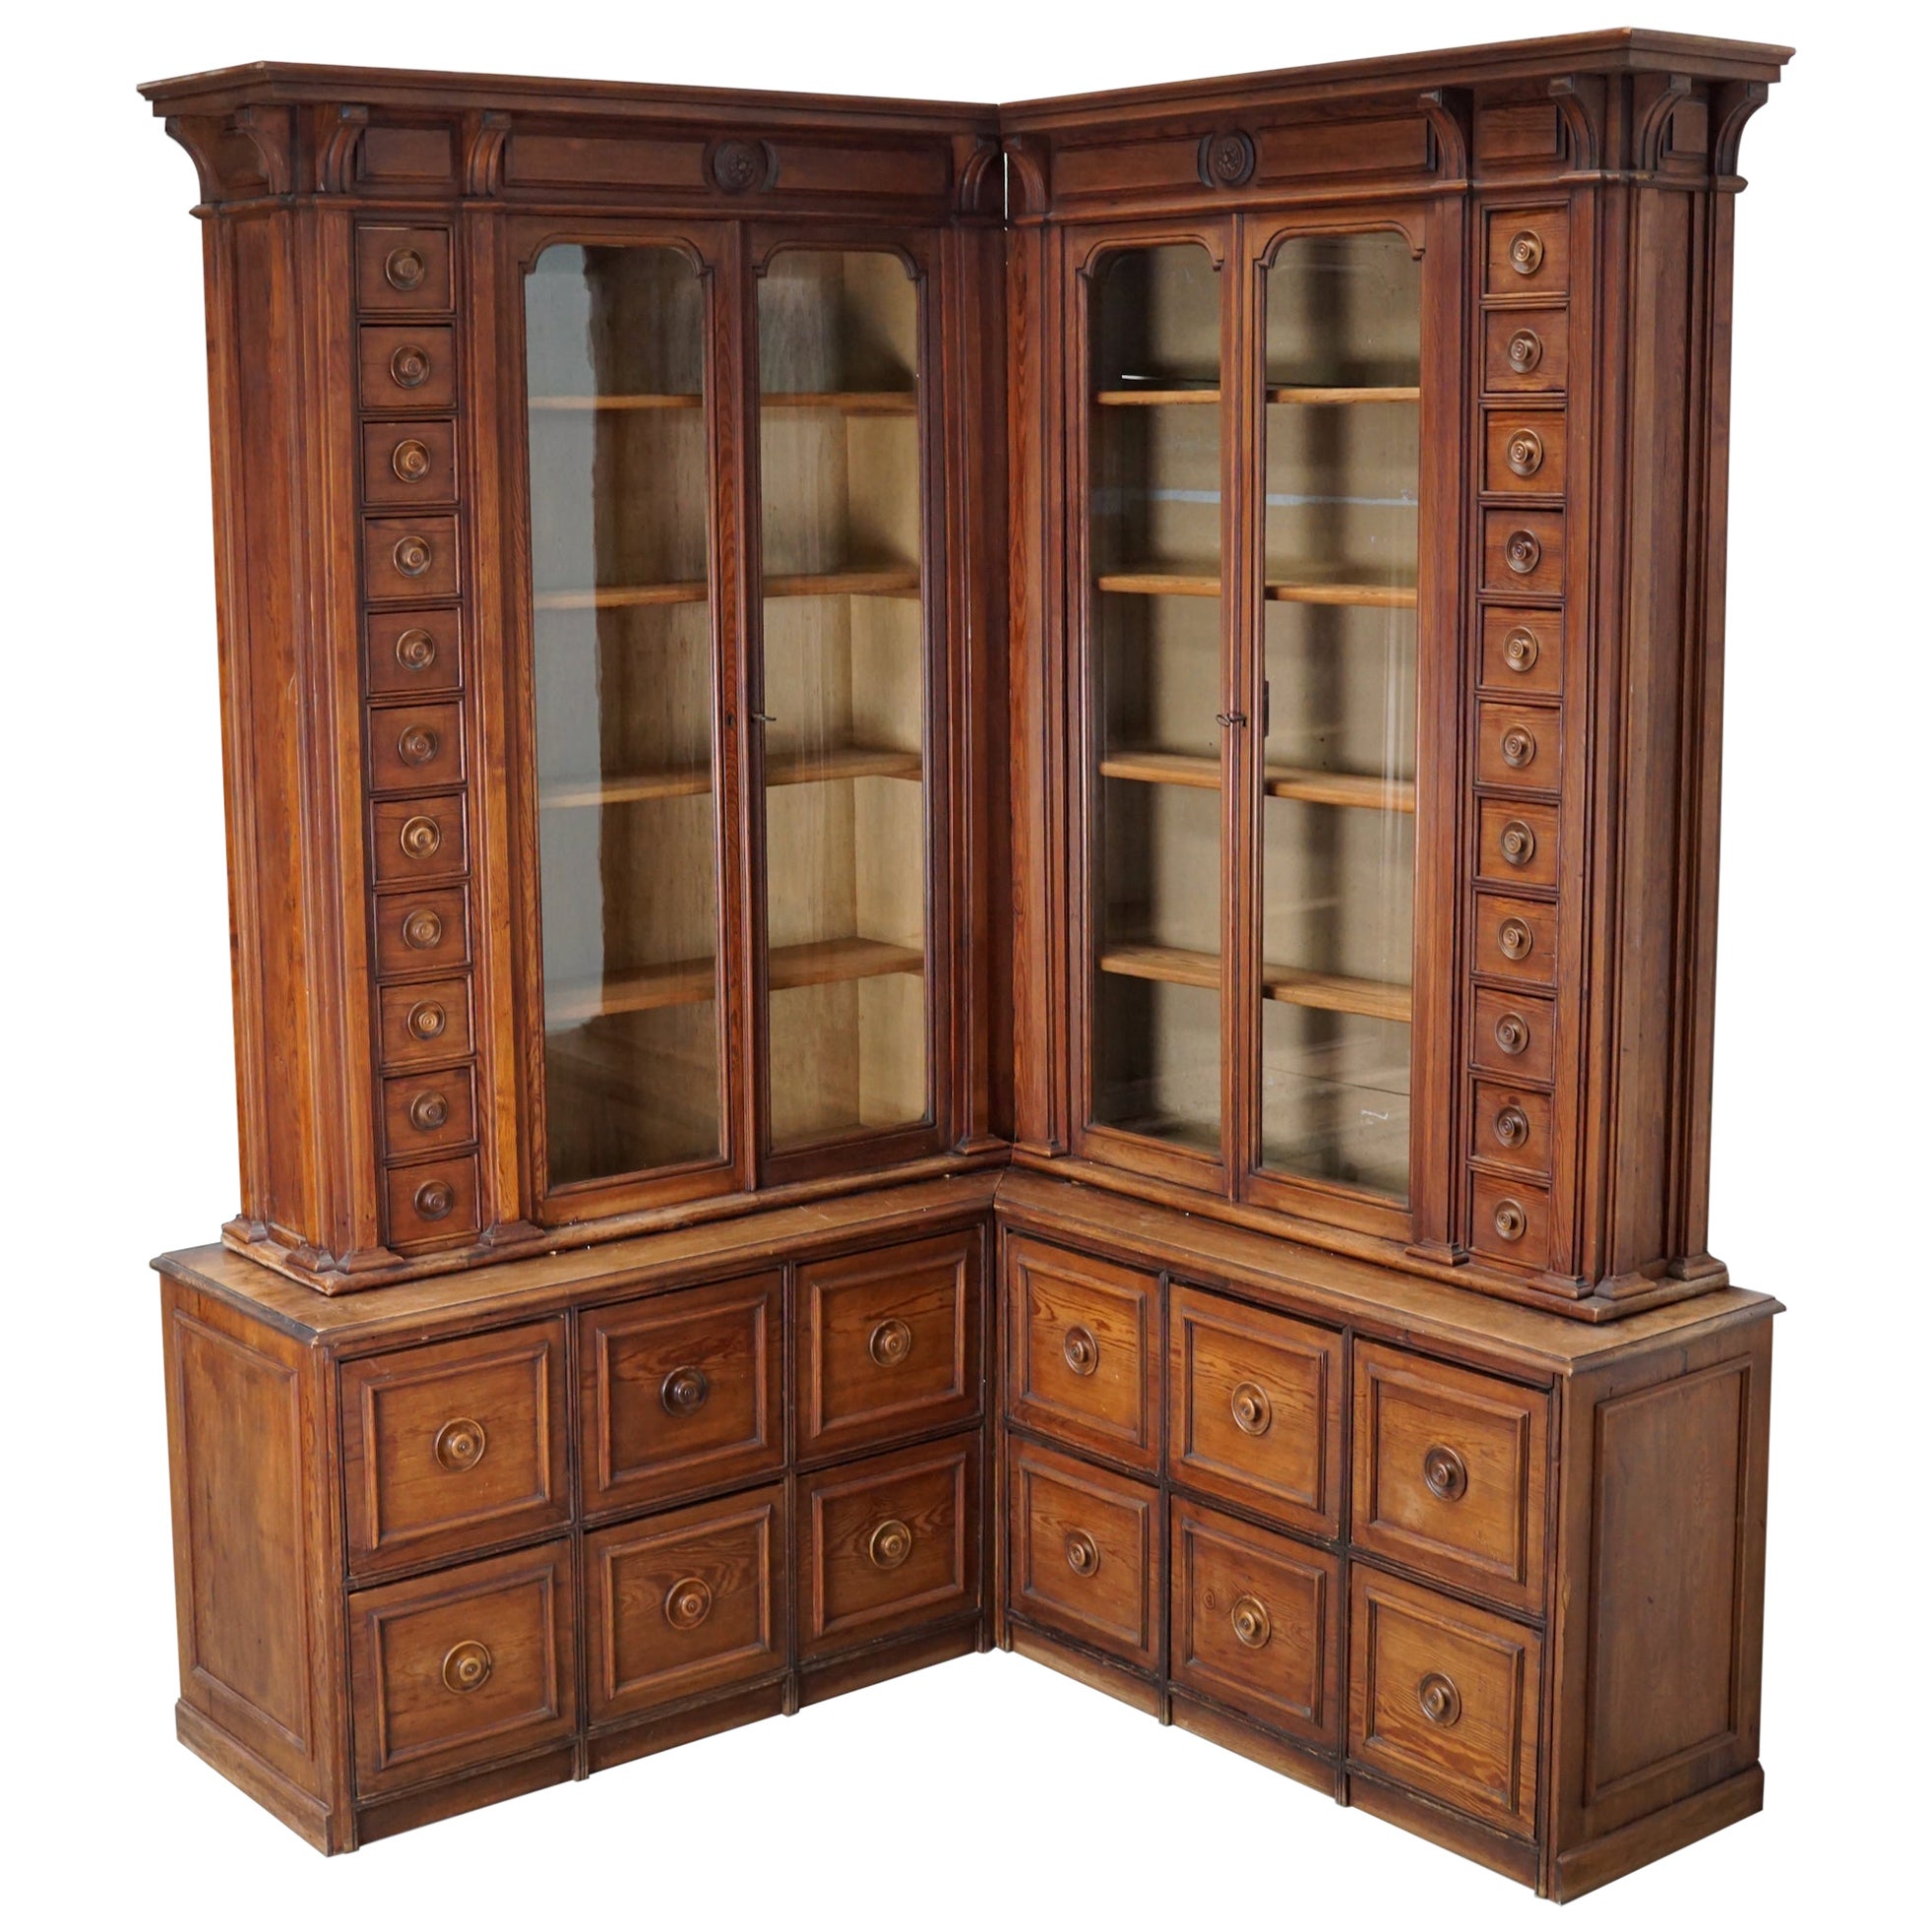 Large Antique German Pitch Pine Corner Apothecary Cabinet / Vitrine ca 1900s For Sale